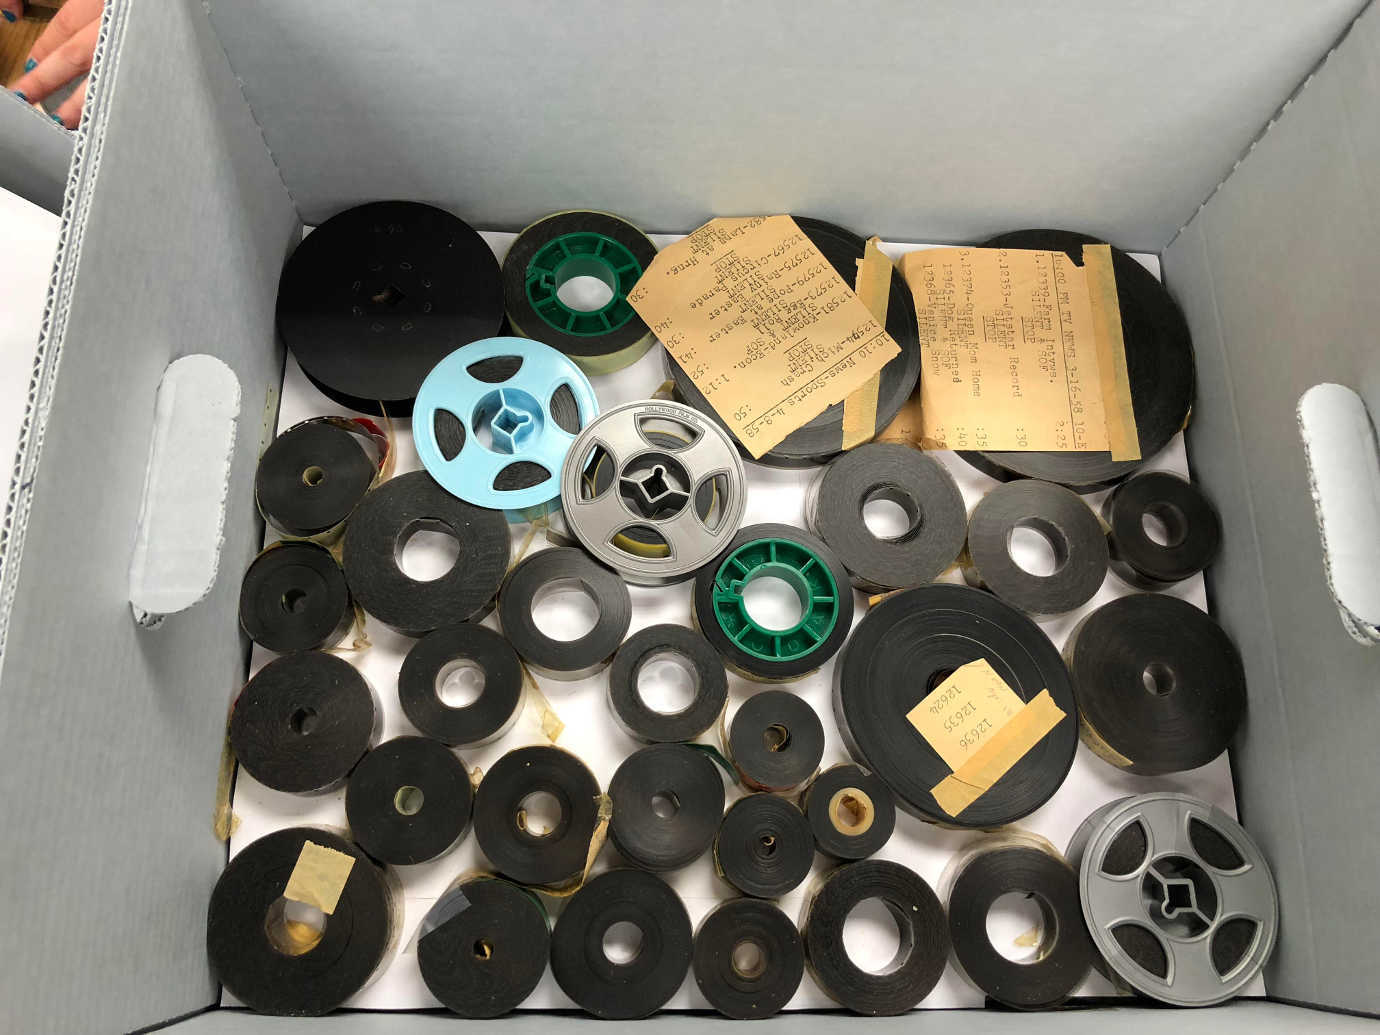 NEH funding helped Wartburg College rehouse portions of its film collection. Image courtesy of Wartburg College.